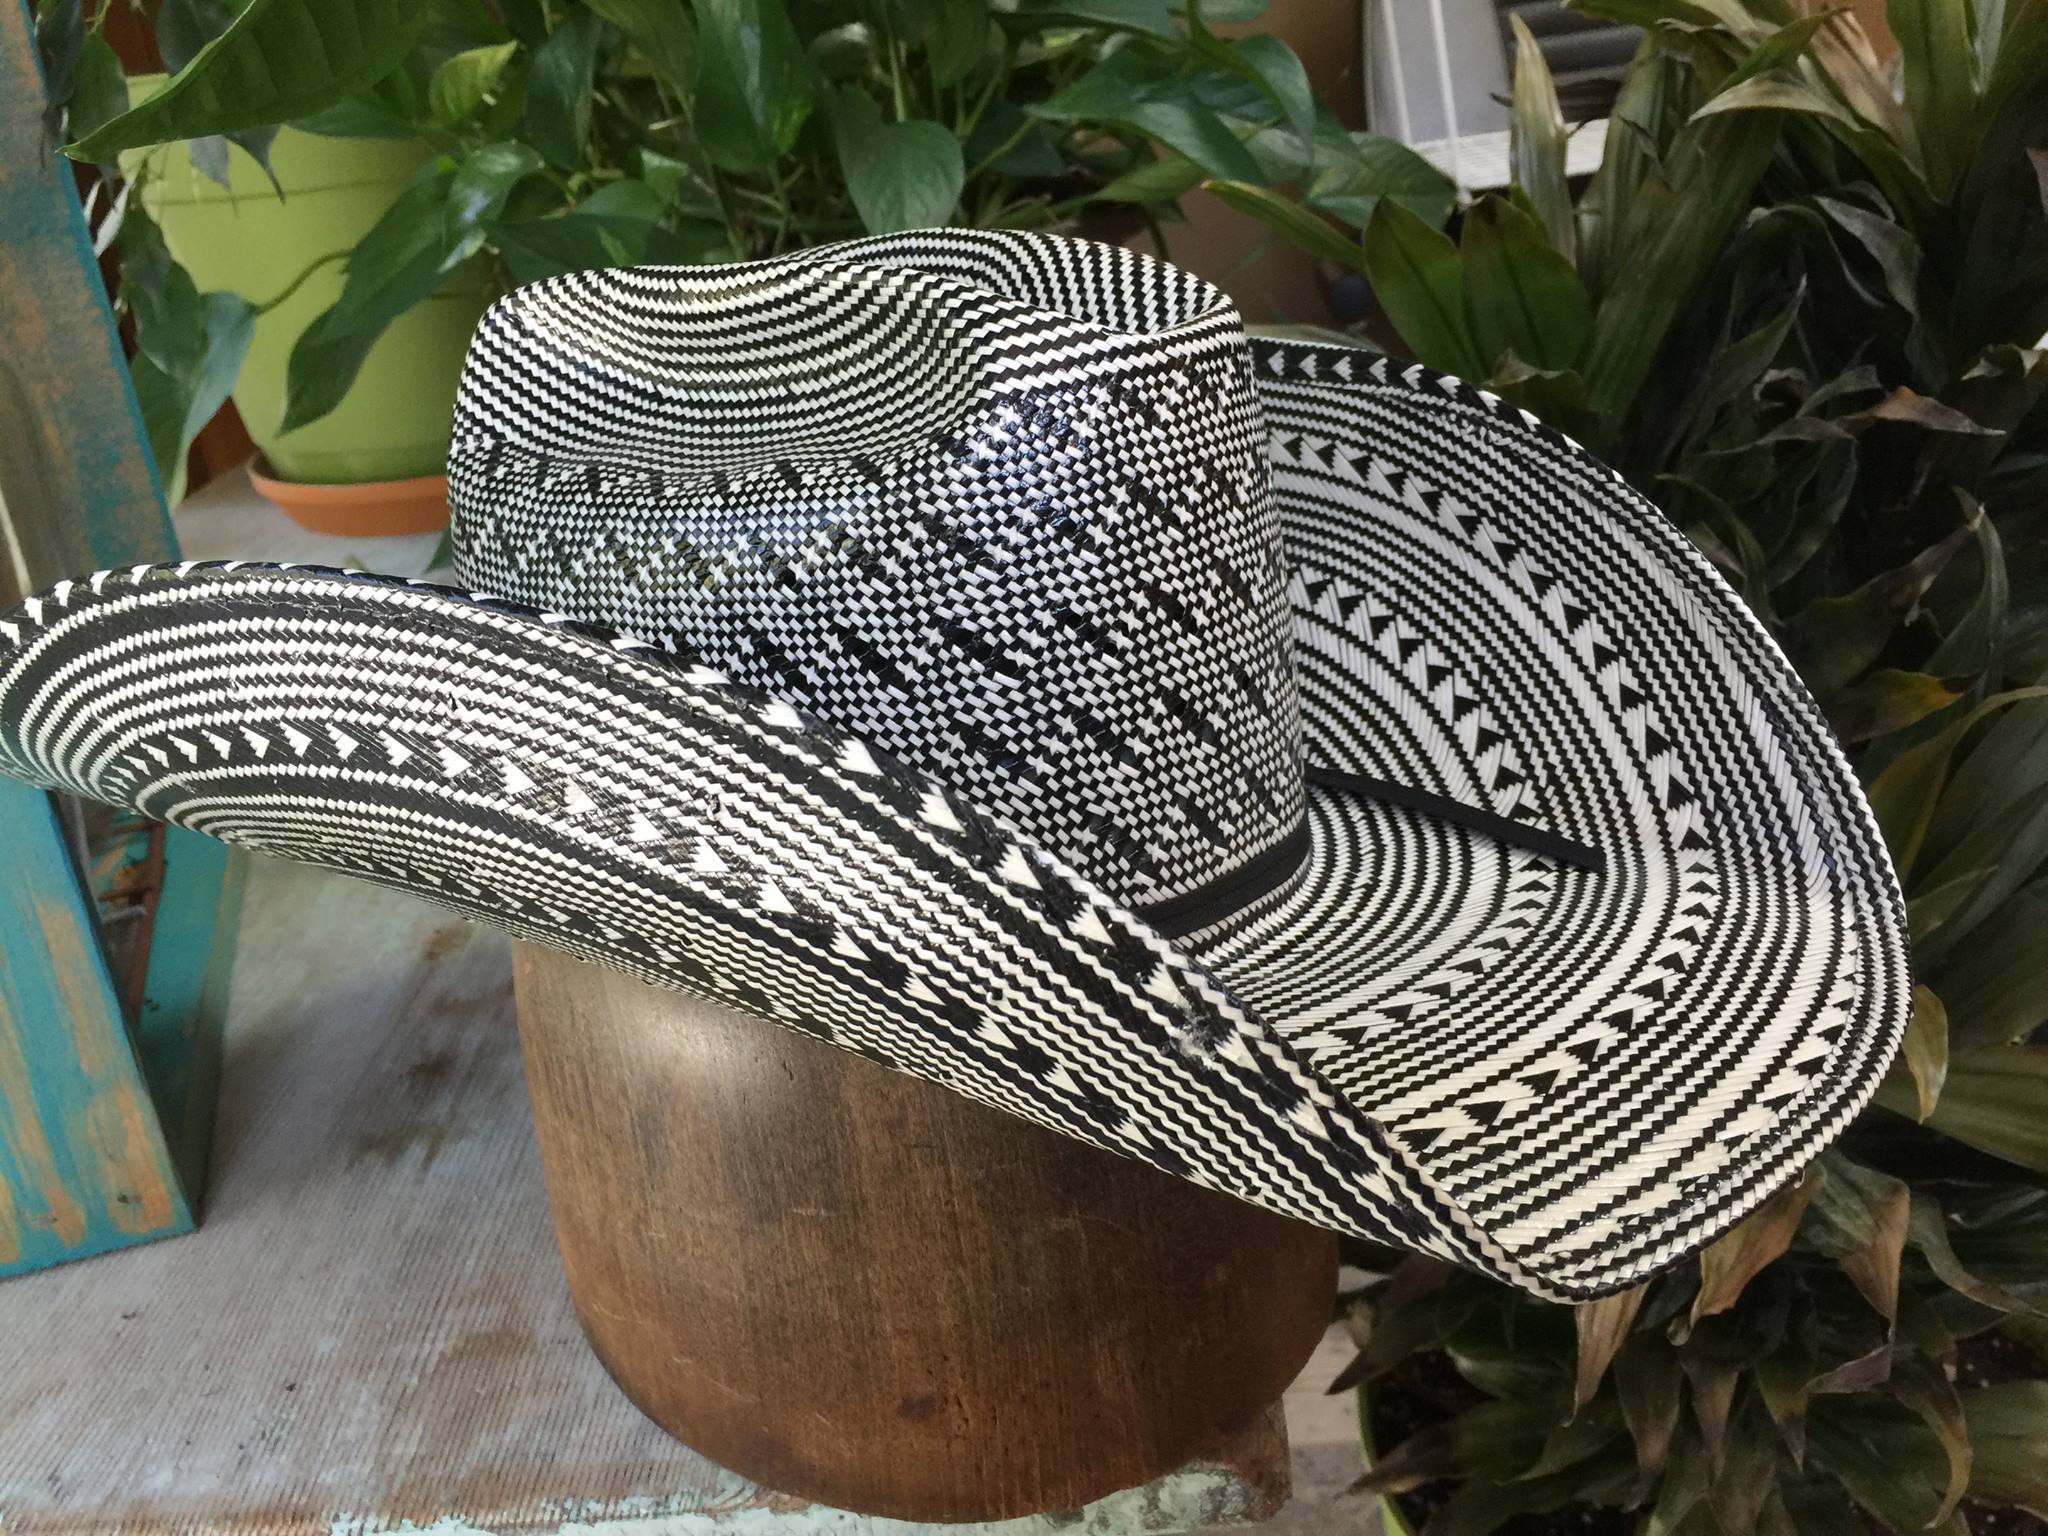 Black and white new straw! American Hats! The best! All sizes available!